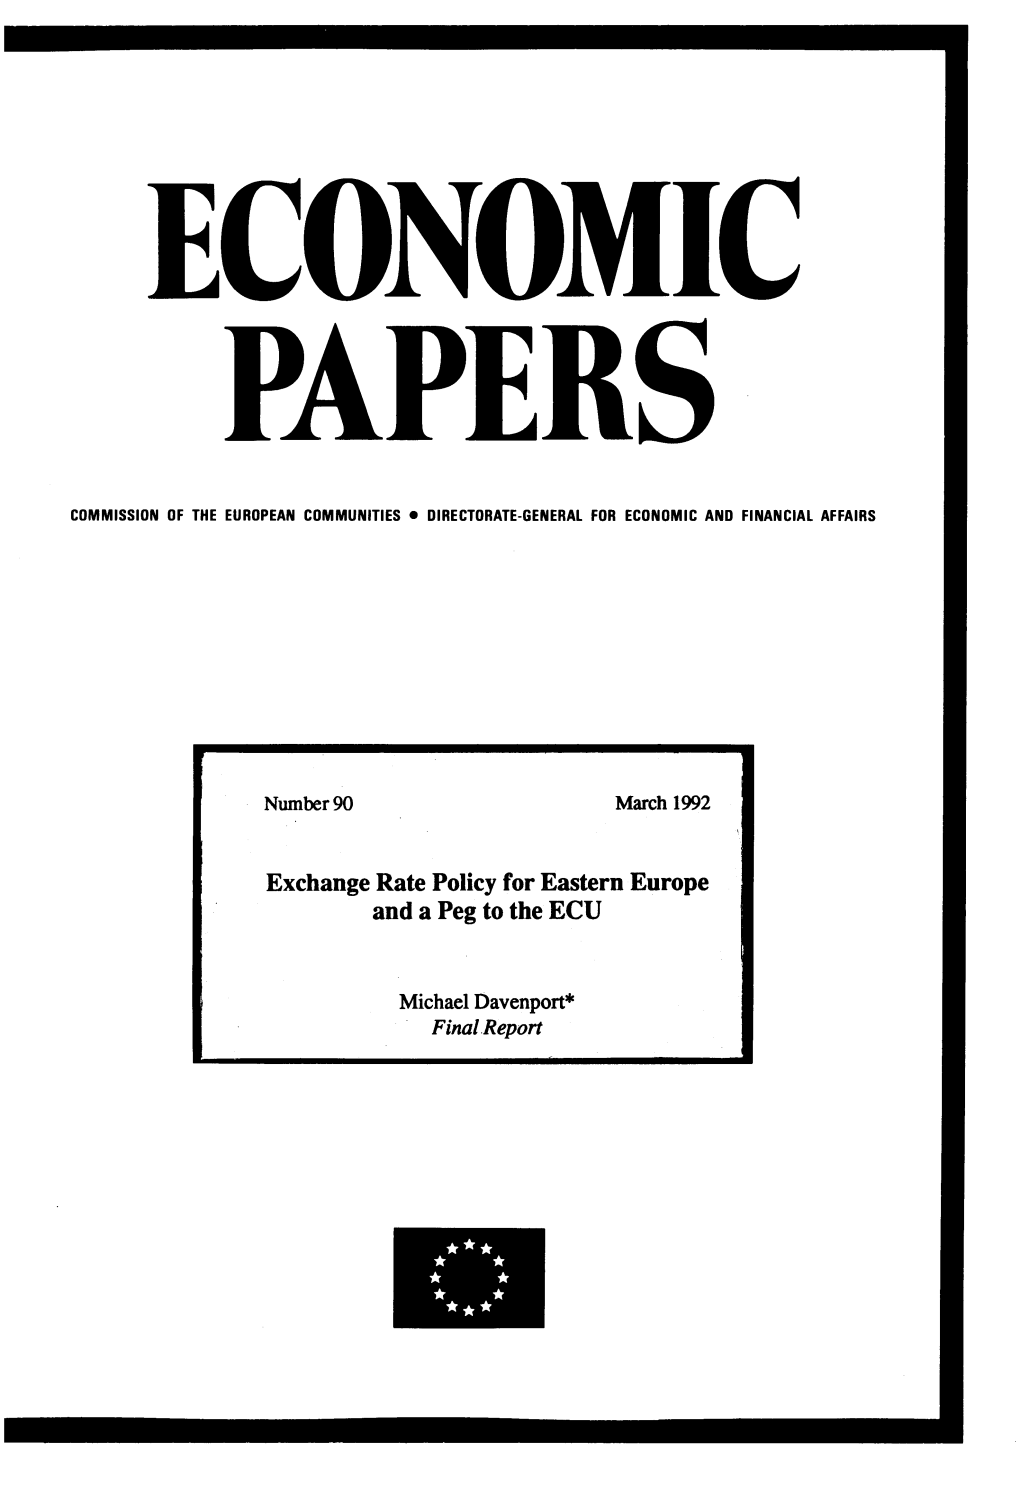 Exchange Rate Policy for Eastern Europe and a Peg to the ECU